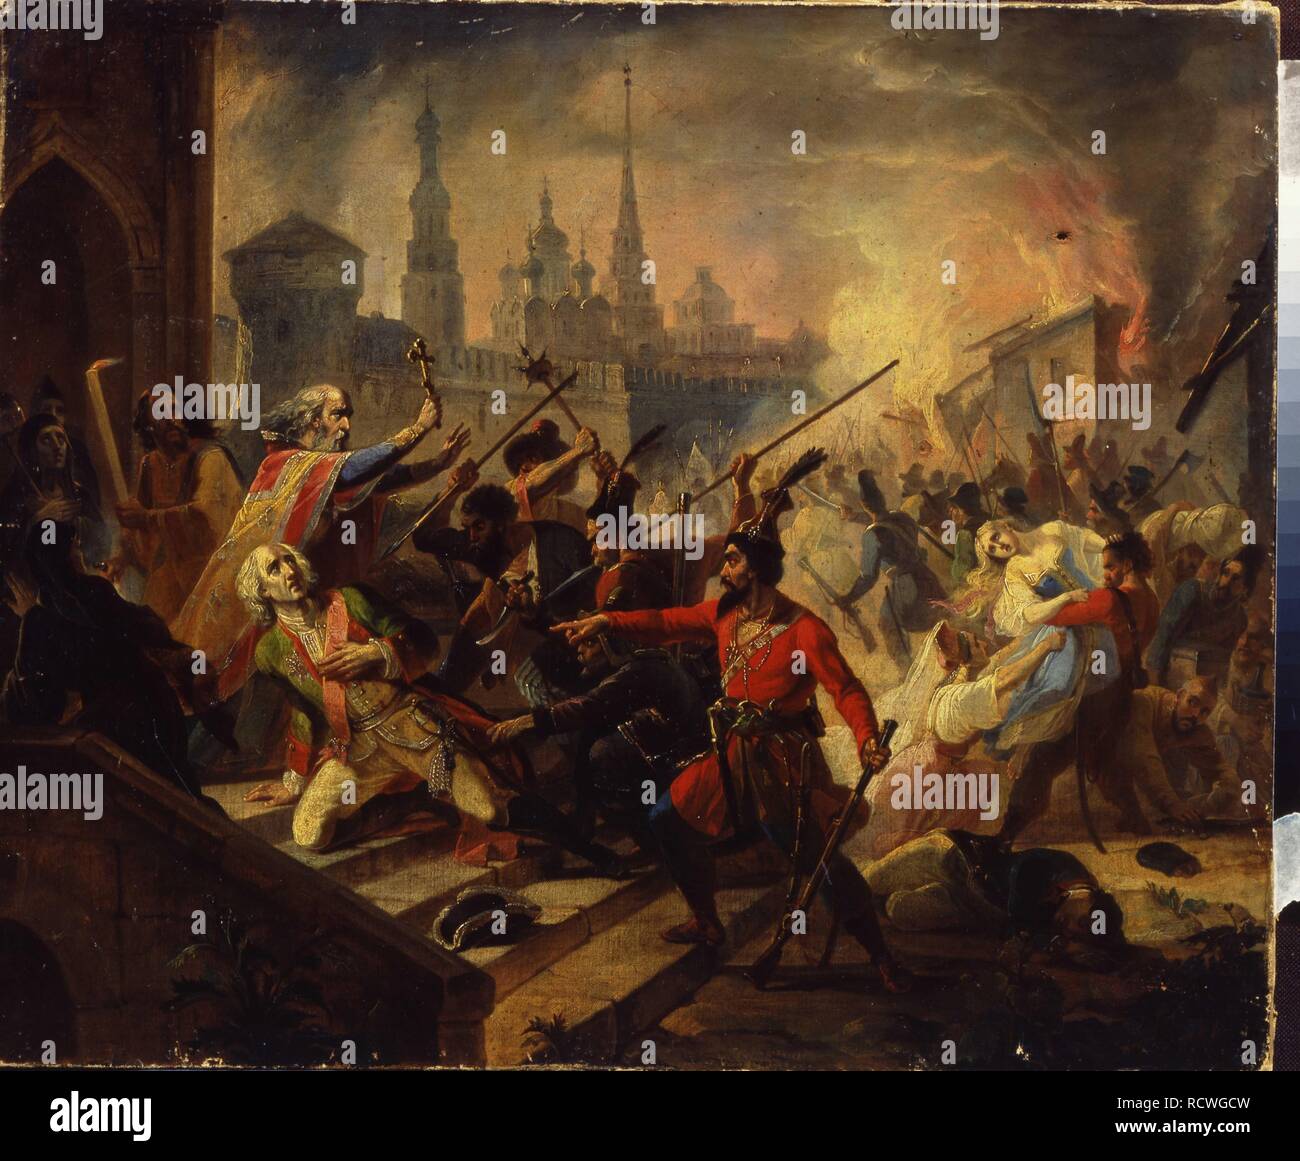 The Pugachev's Battle of Kazan on July 1774 (Scene from the Pugachev's  Rebellion). Museum: State Tretyakov Gallery, Moscow. Author: Russian master  Stock Photo - Alamy